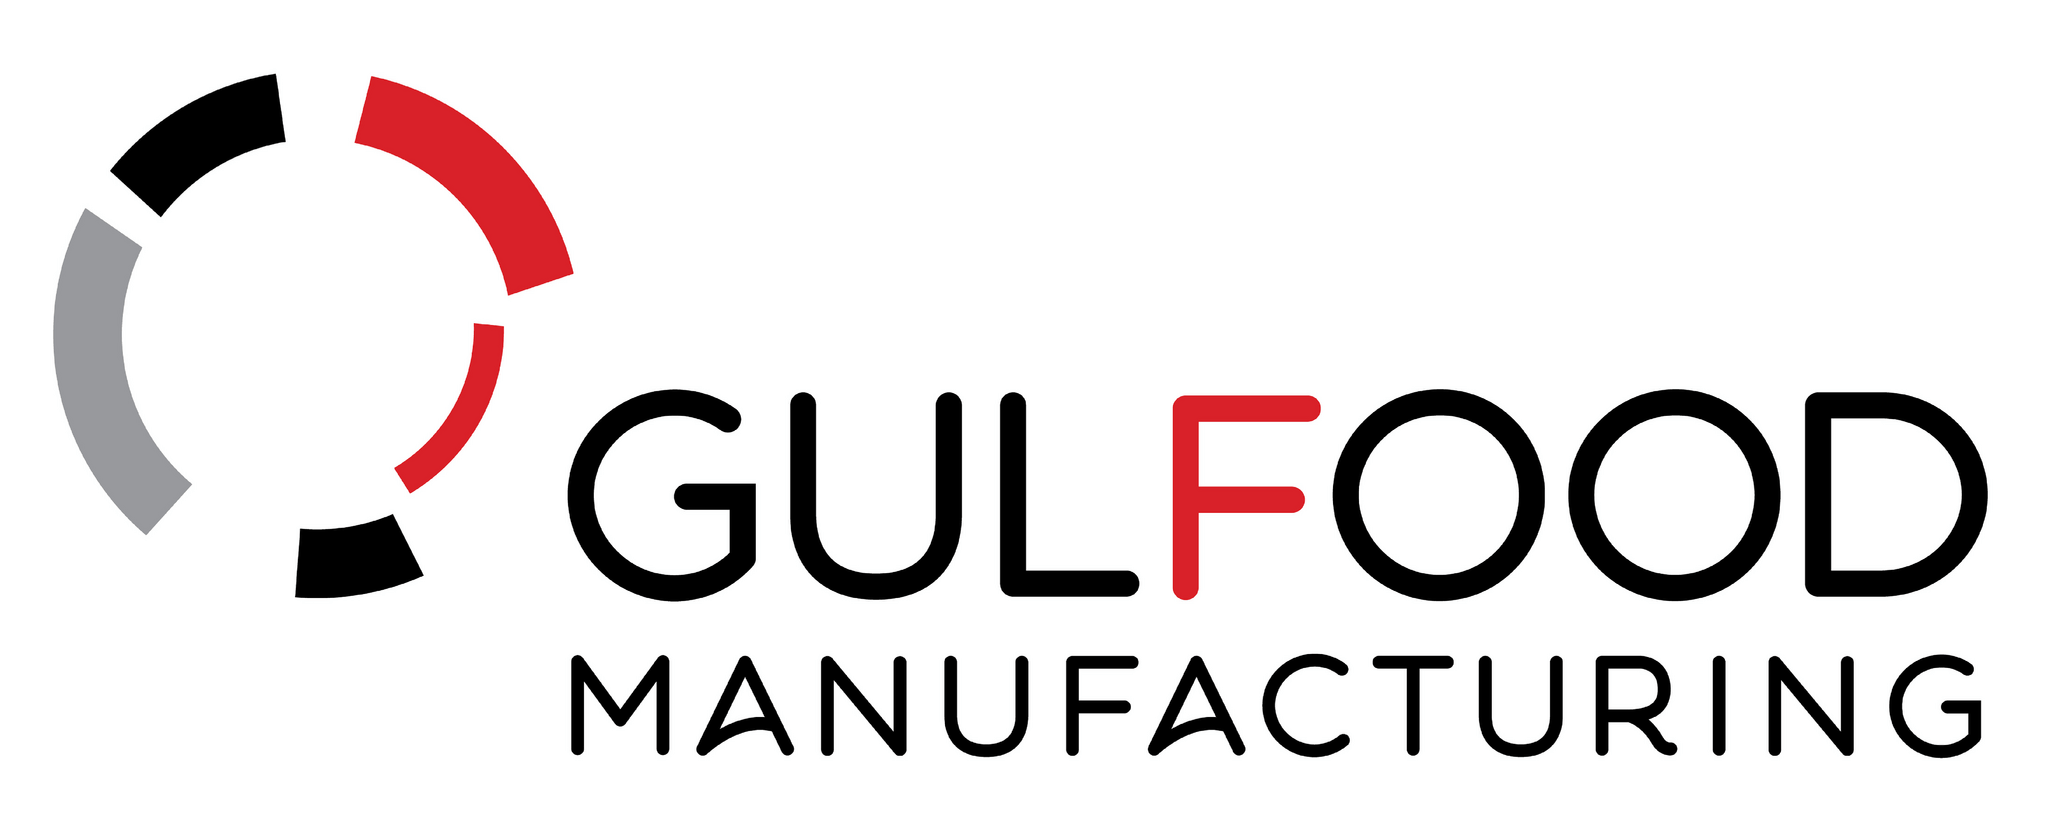 Manufacturing Logo - Gulfood Manufacturing 2018 in Dubai - Show Collateral